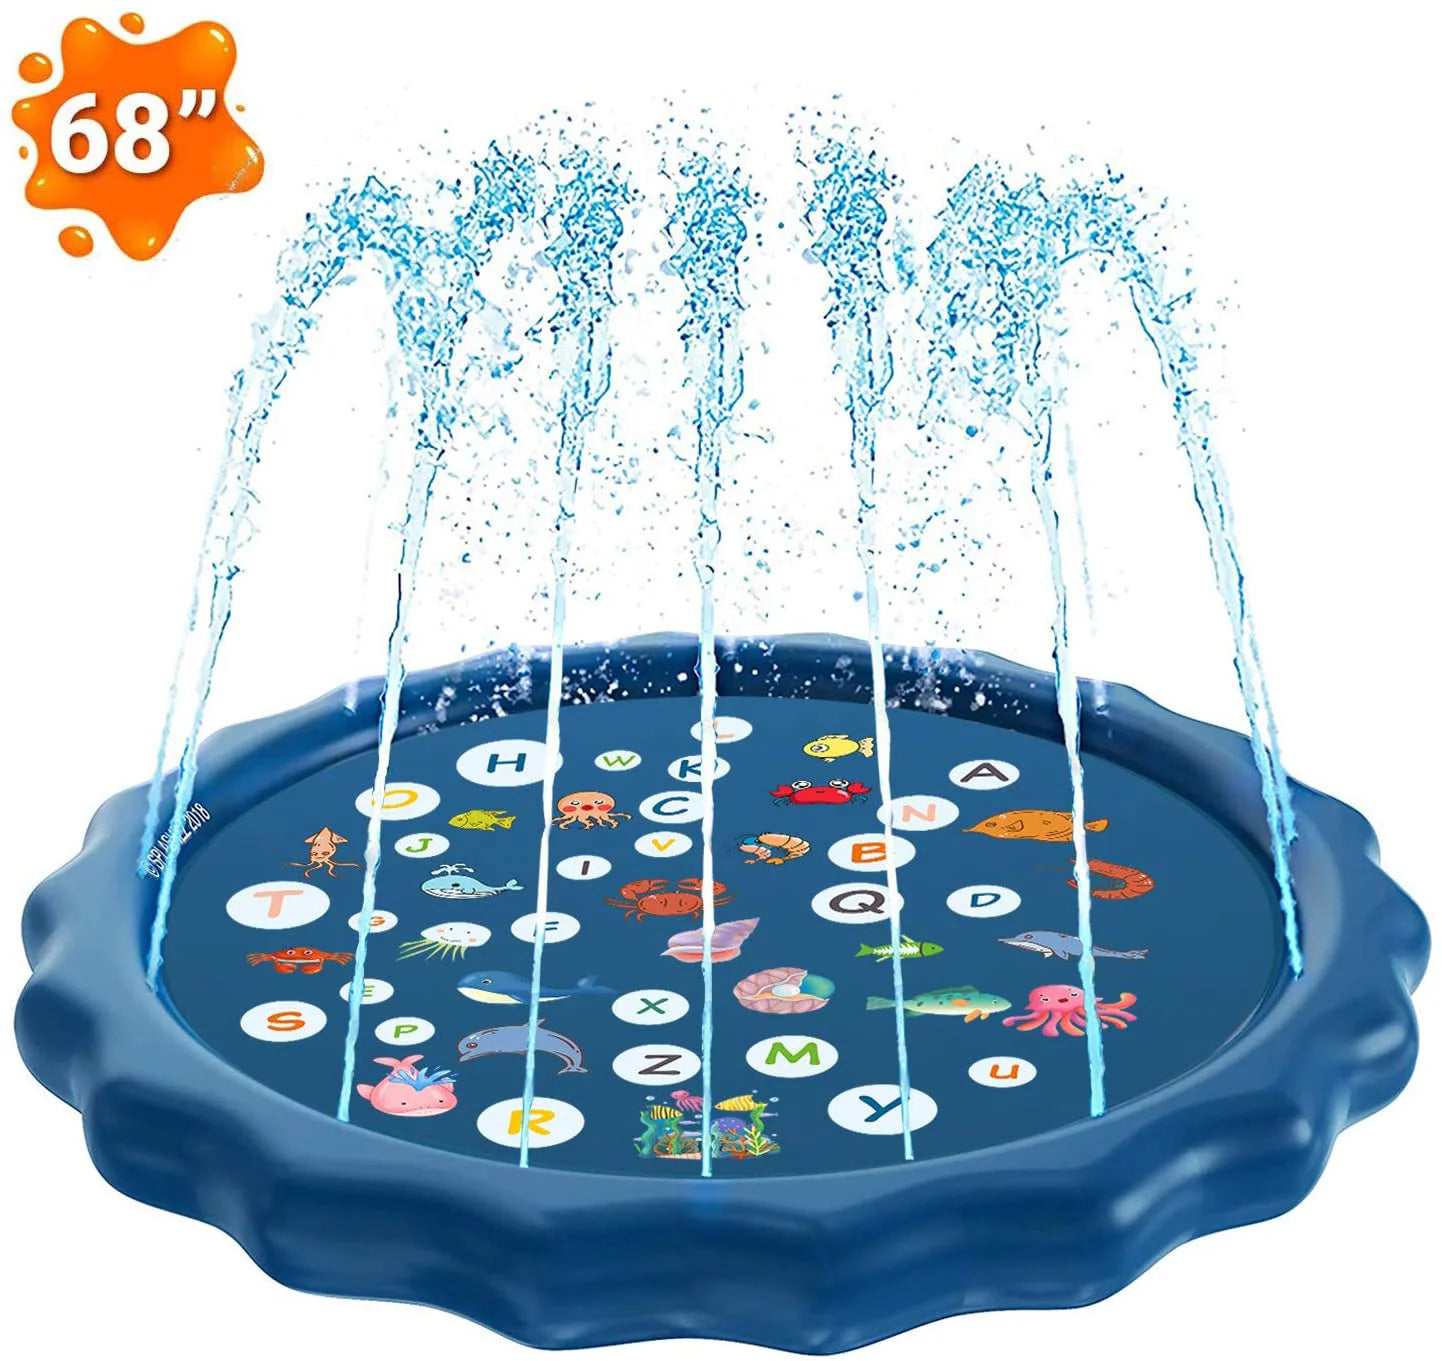 Pyramid Home Décor 68’’ Sprinkler for Kids, 3-in-1 Splash Pad, Toddler Pool for Wading Swimming and Learning, Inflatable Outdoor Water Toys Fun Toddlers, Kids, Boys and Girls